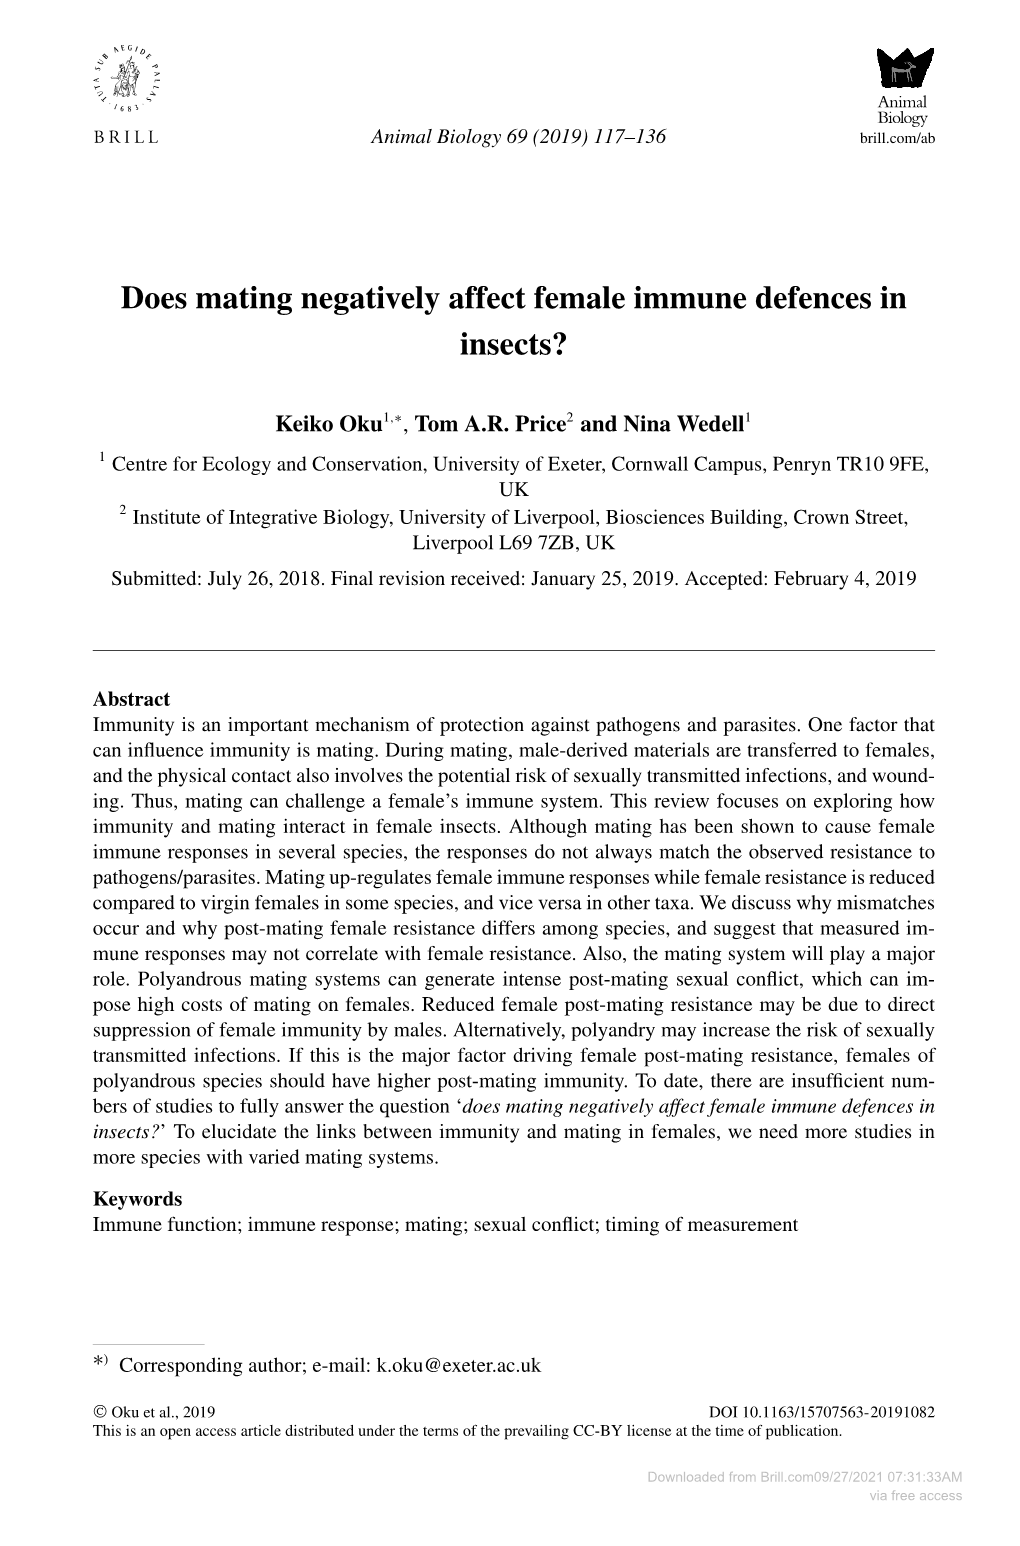 Does Mating Negatively Affect Female Immune Defences in Insects?